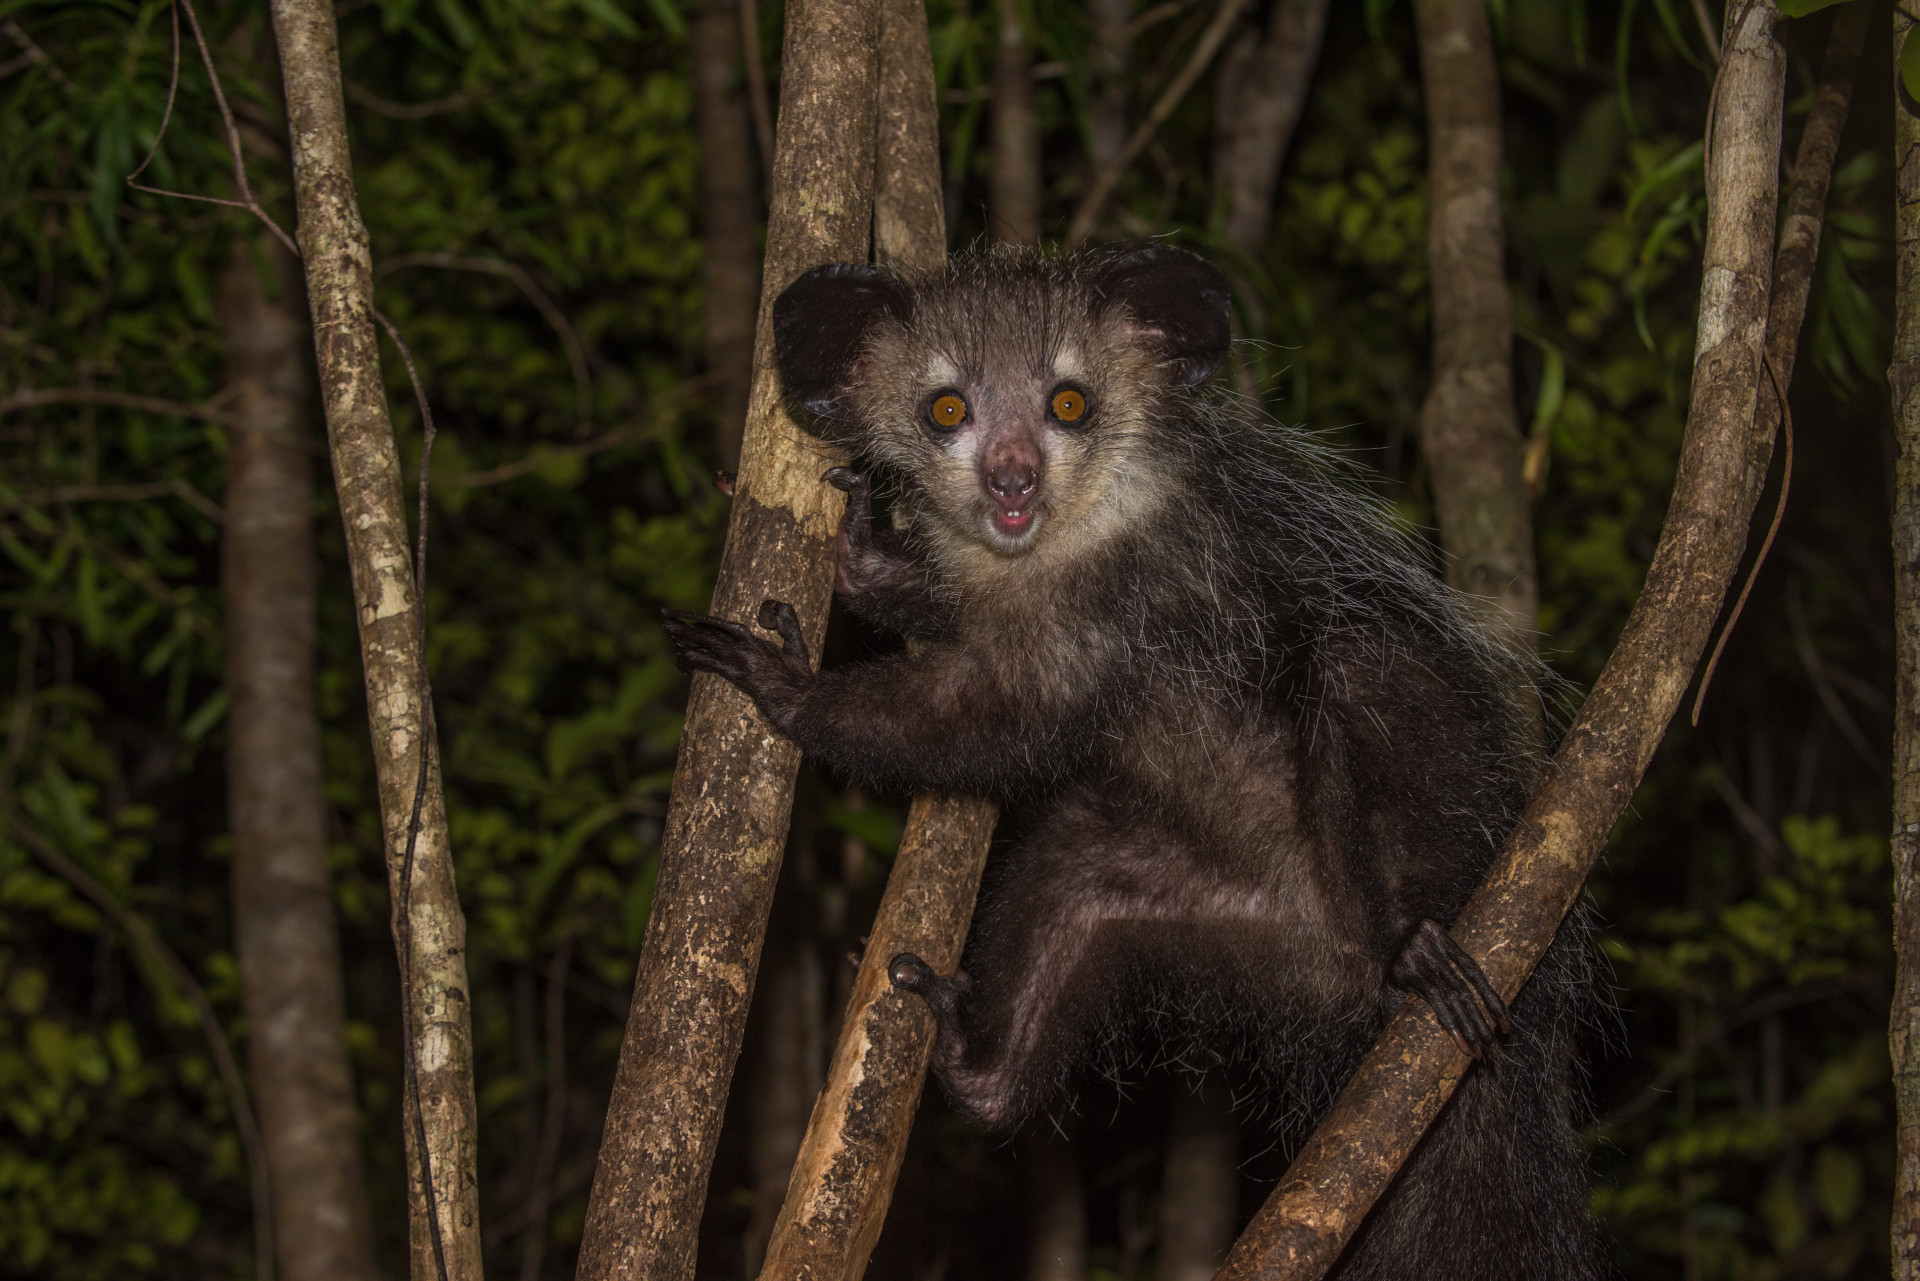 You'll need patience and a penchant for staying up all night to spy this endangered lemur, the world's largest nocturnal primate.<p>You may also like:<a href="https://www.starsinsider.com/n/483355?utm_source=msn.com&utm_medium=display&utm_campaign=referral_description&utm_content=265328v11en-us"> The devastating condition known as sepsis</a></p>